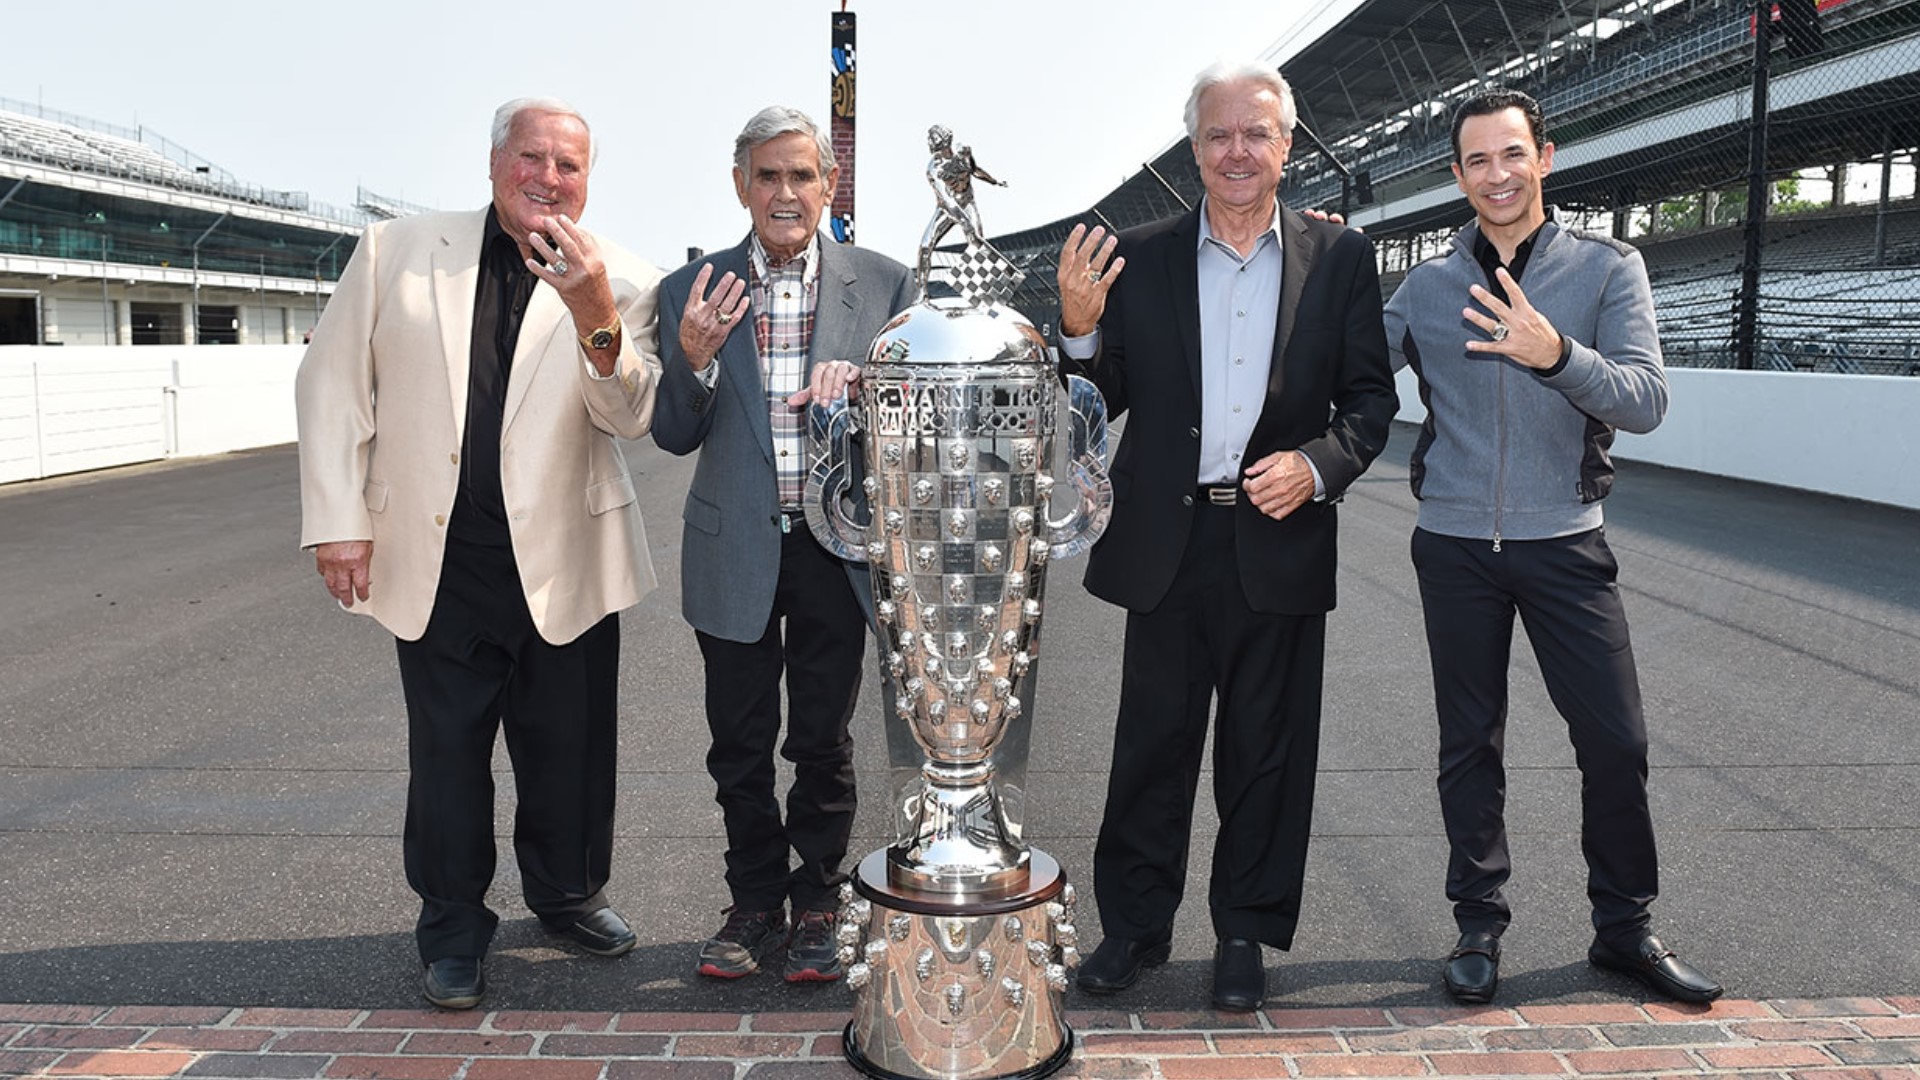 IMS releases 4time Indy 500 winners photo